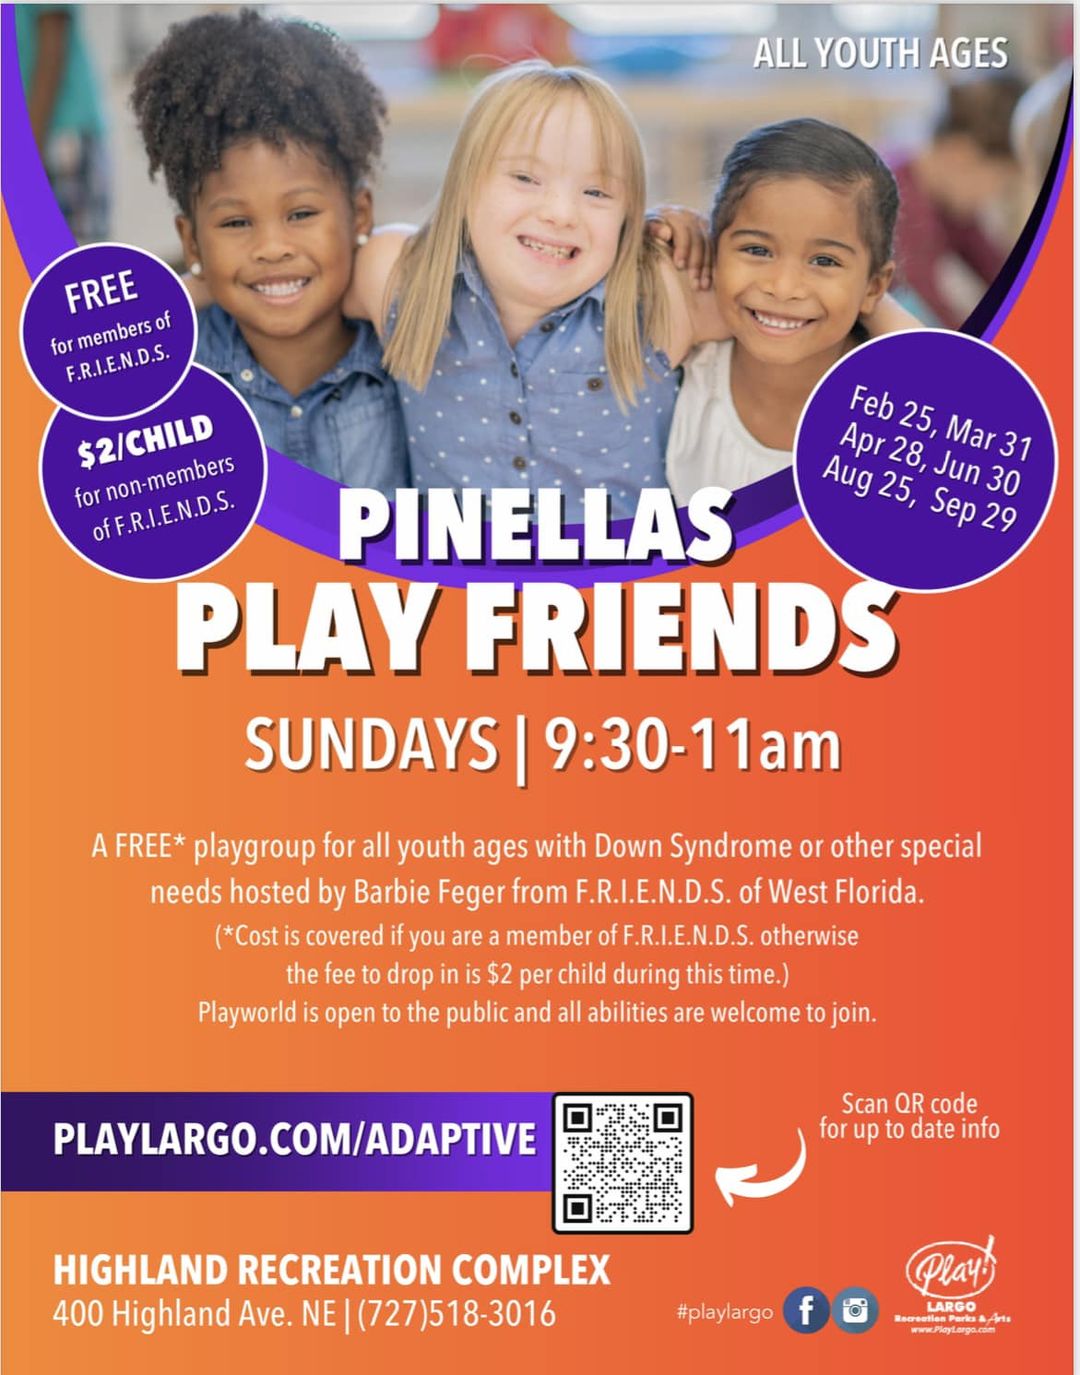 Participate in this no-cost playgroup designed for youth of all ages with Down Syndrome or other special needs, hosted by Barbie Feger from F.R.I.E.N.D.S. of West Florida.